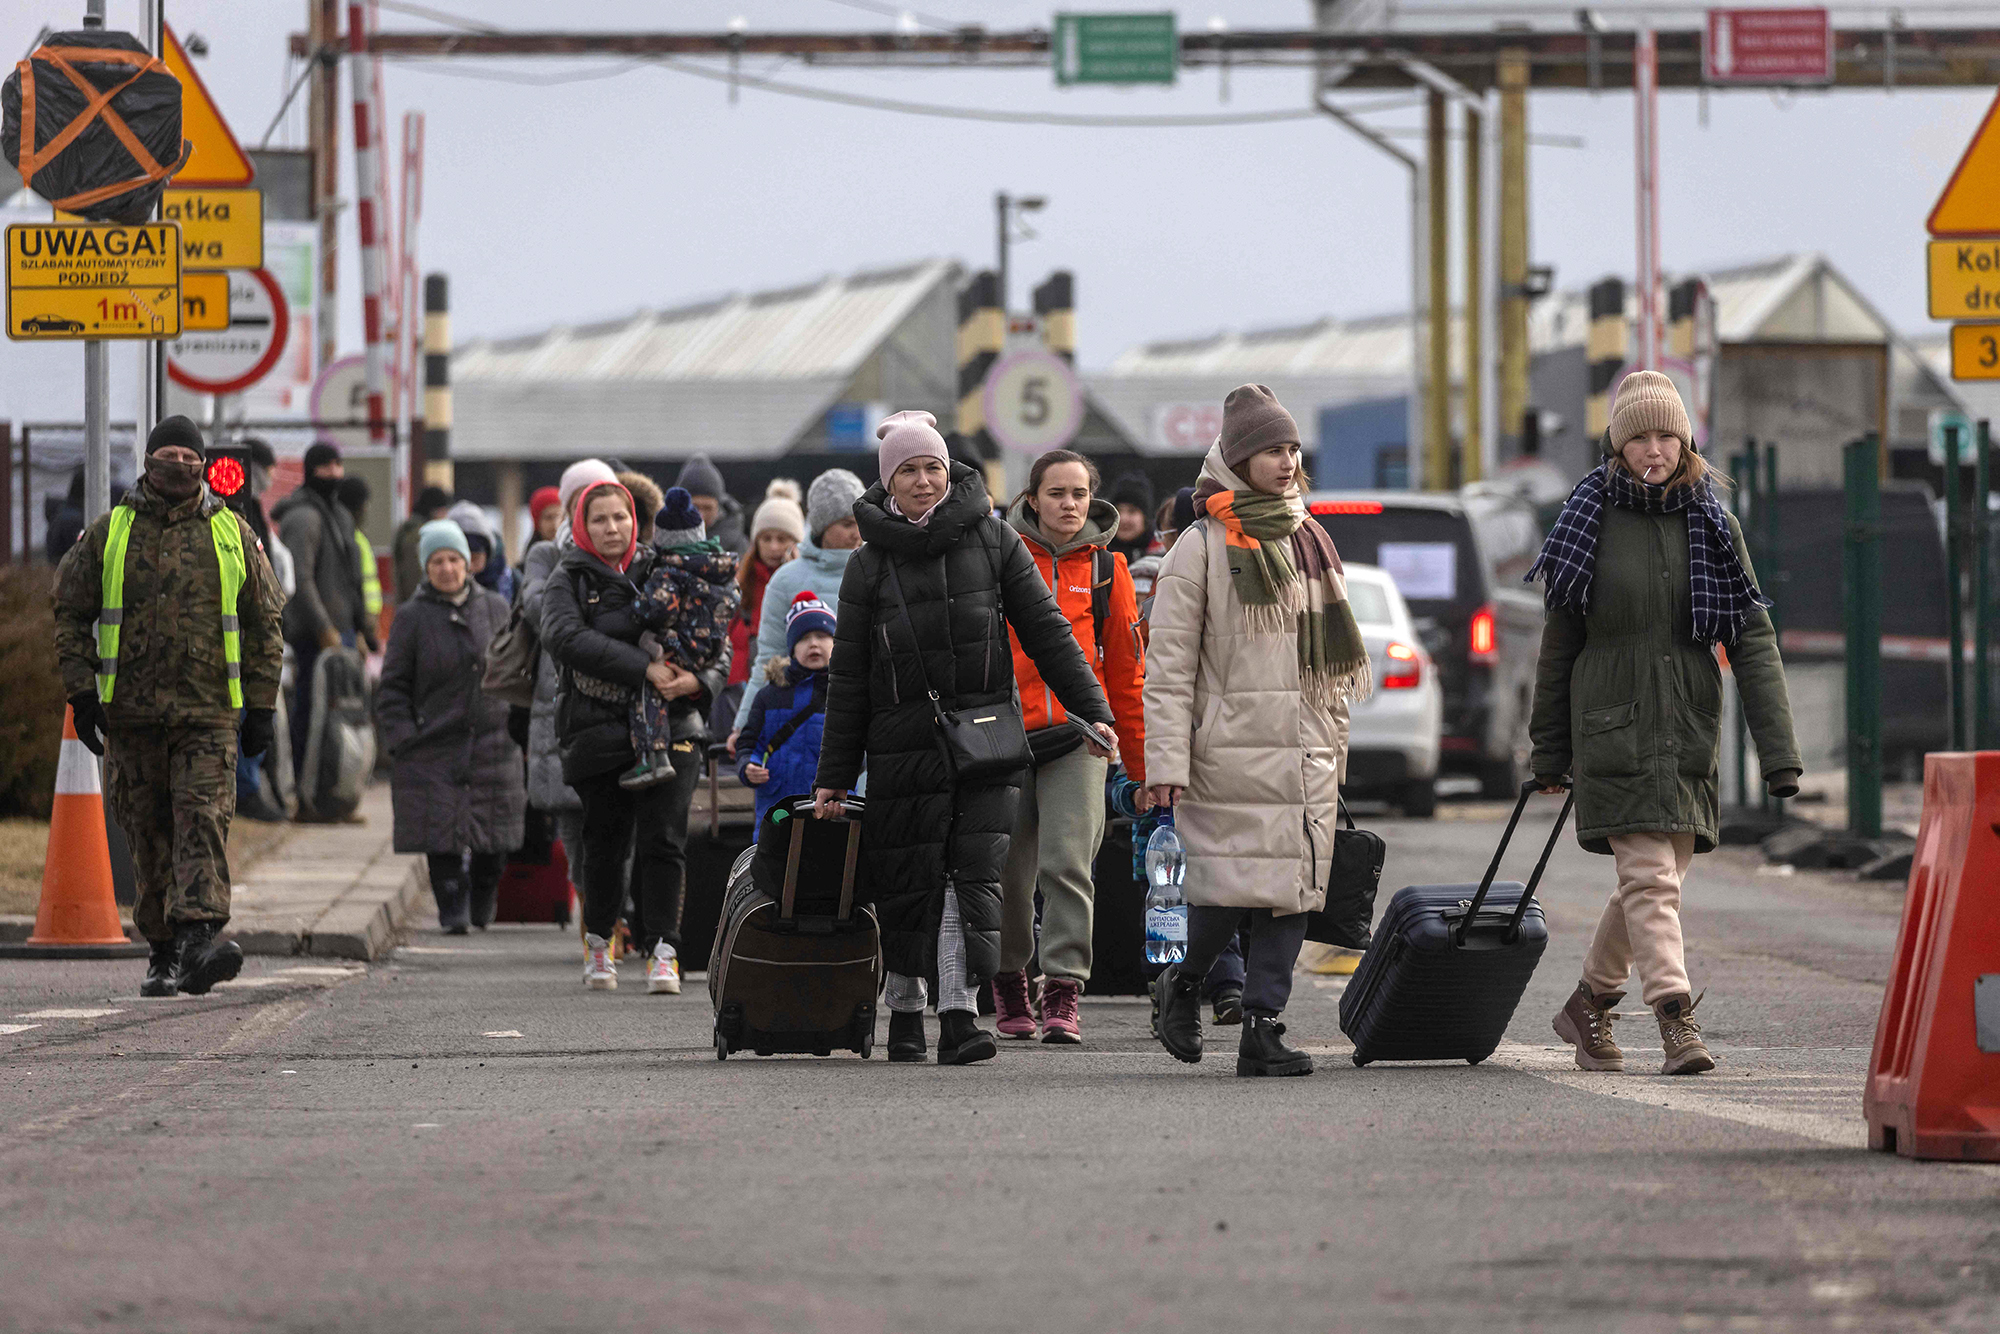 Refugees from Ukraine are pictured after crossing the Ukrainian-Polish border in Korczowa on March 2.